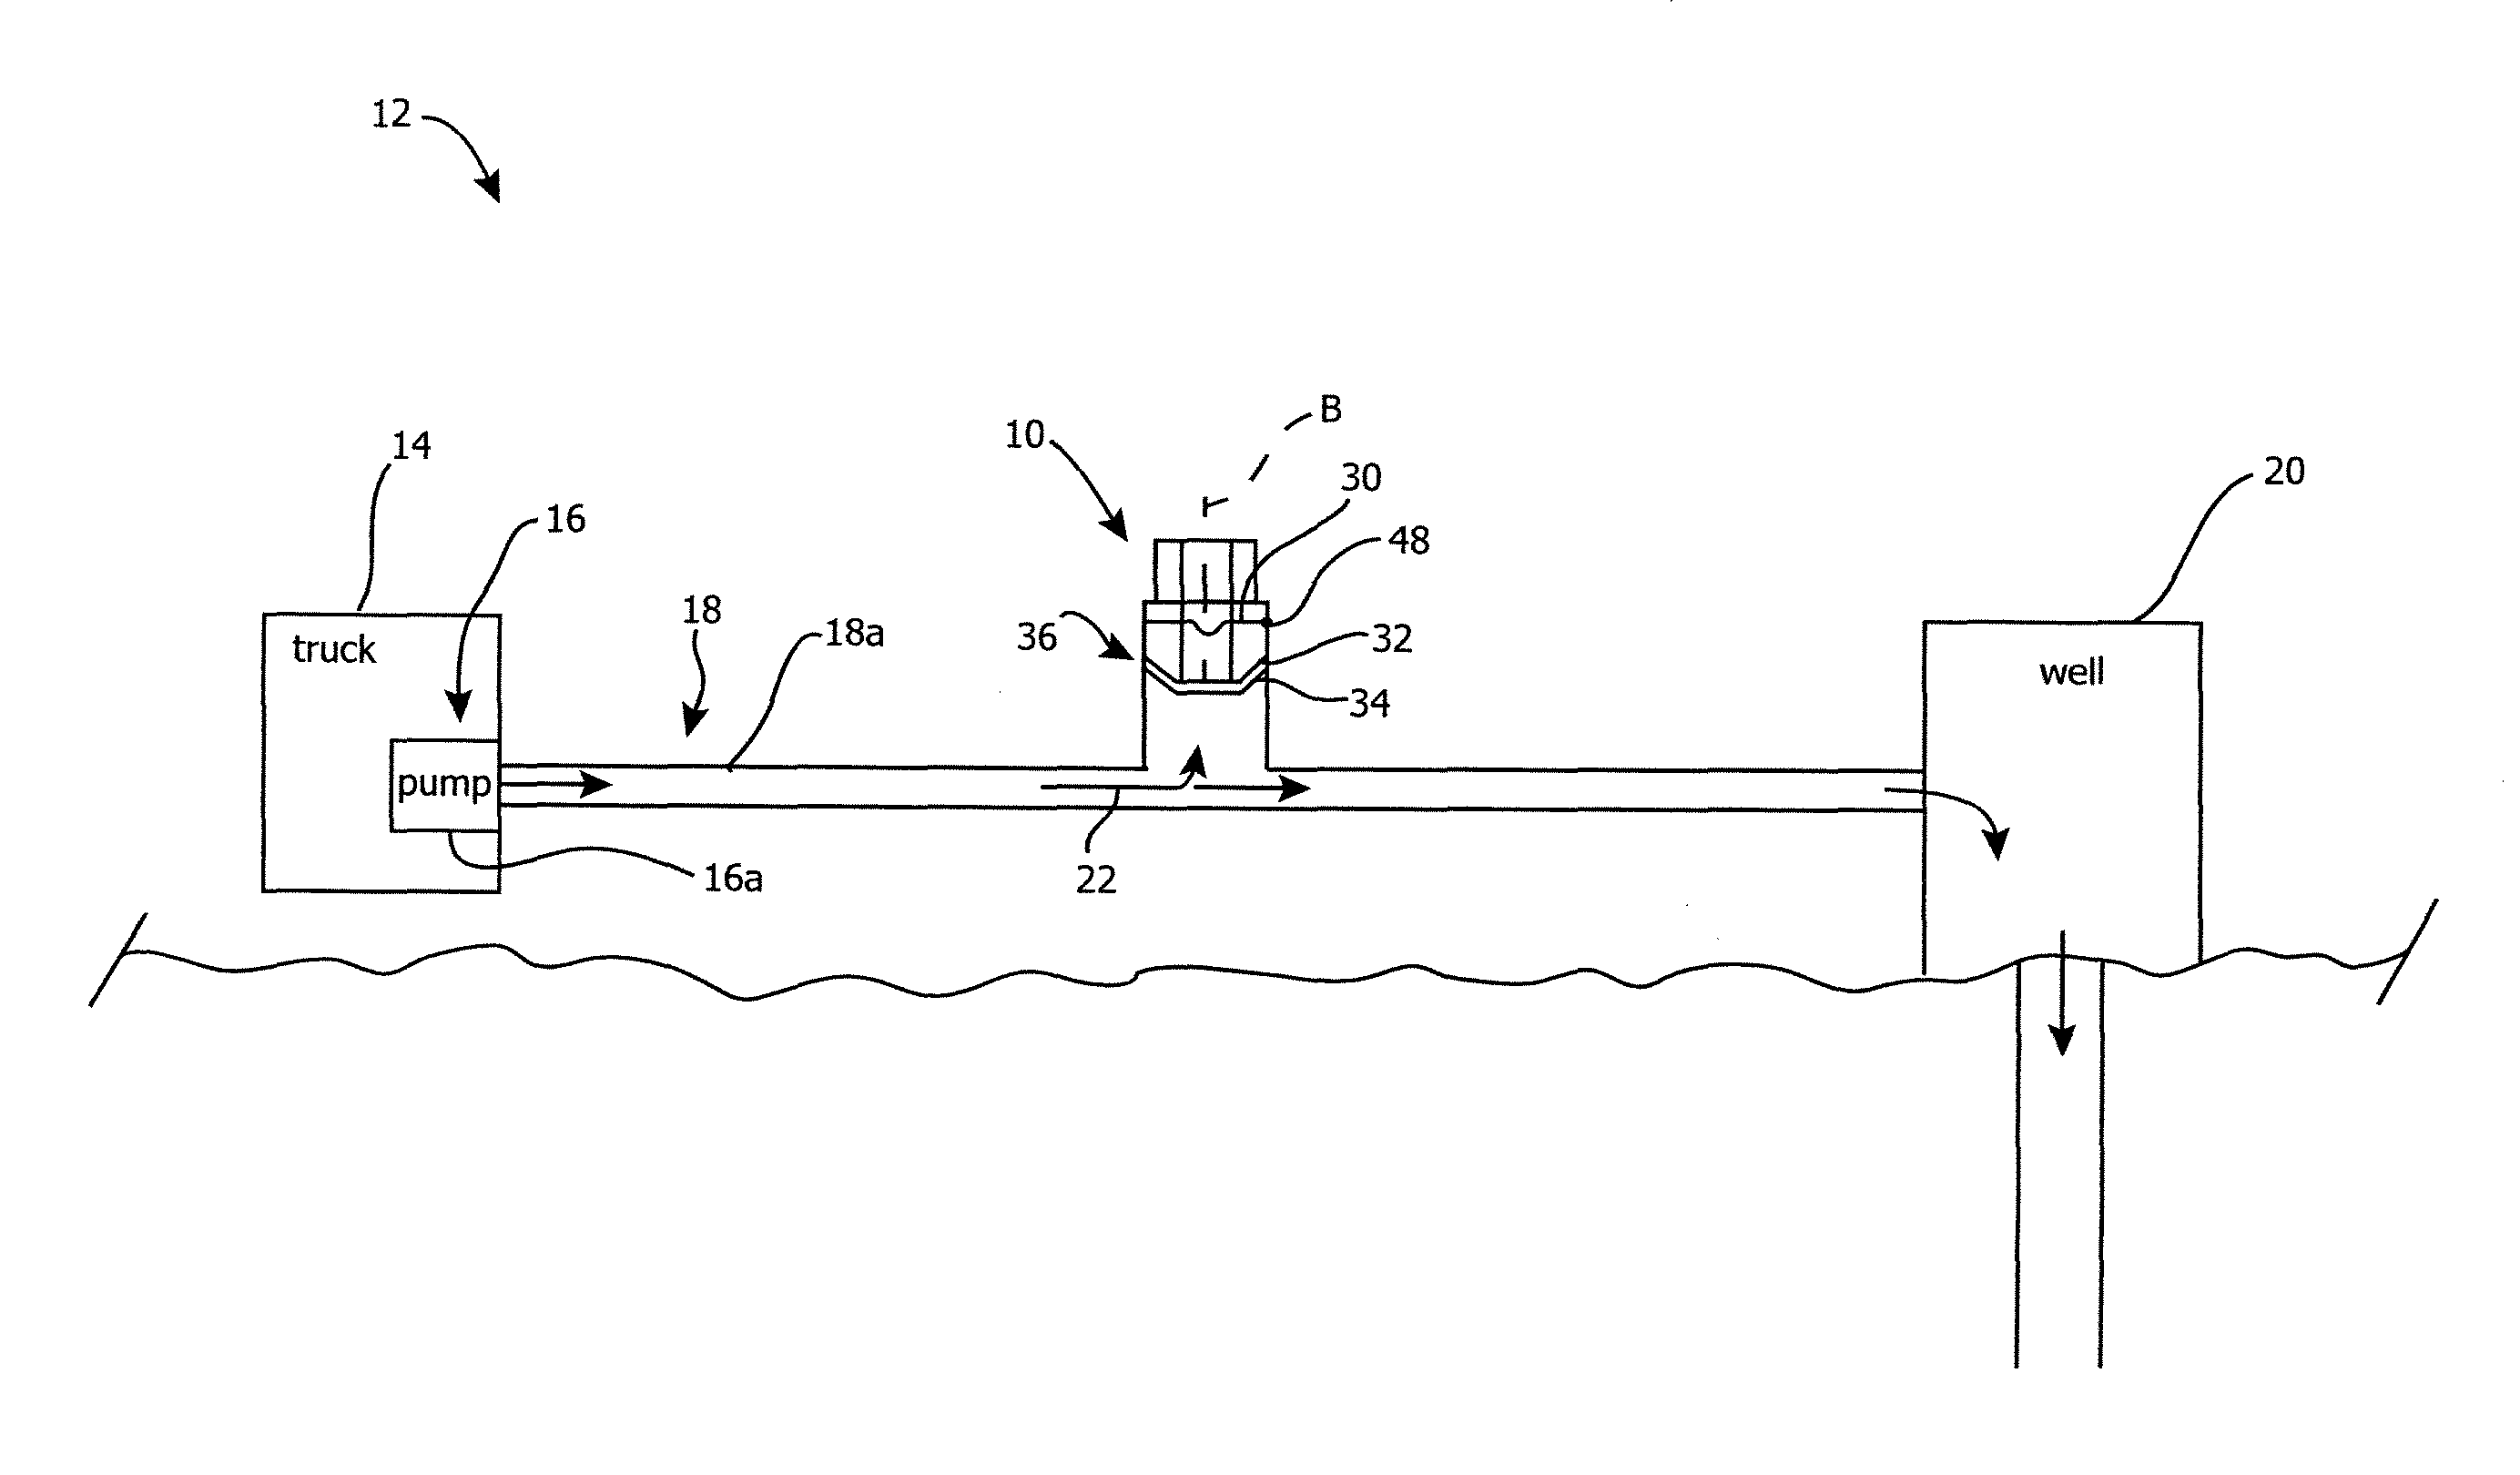 Pressure relief device, system, and method